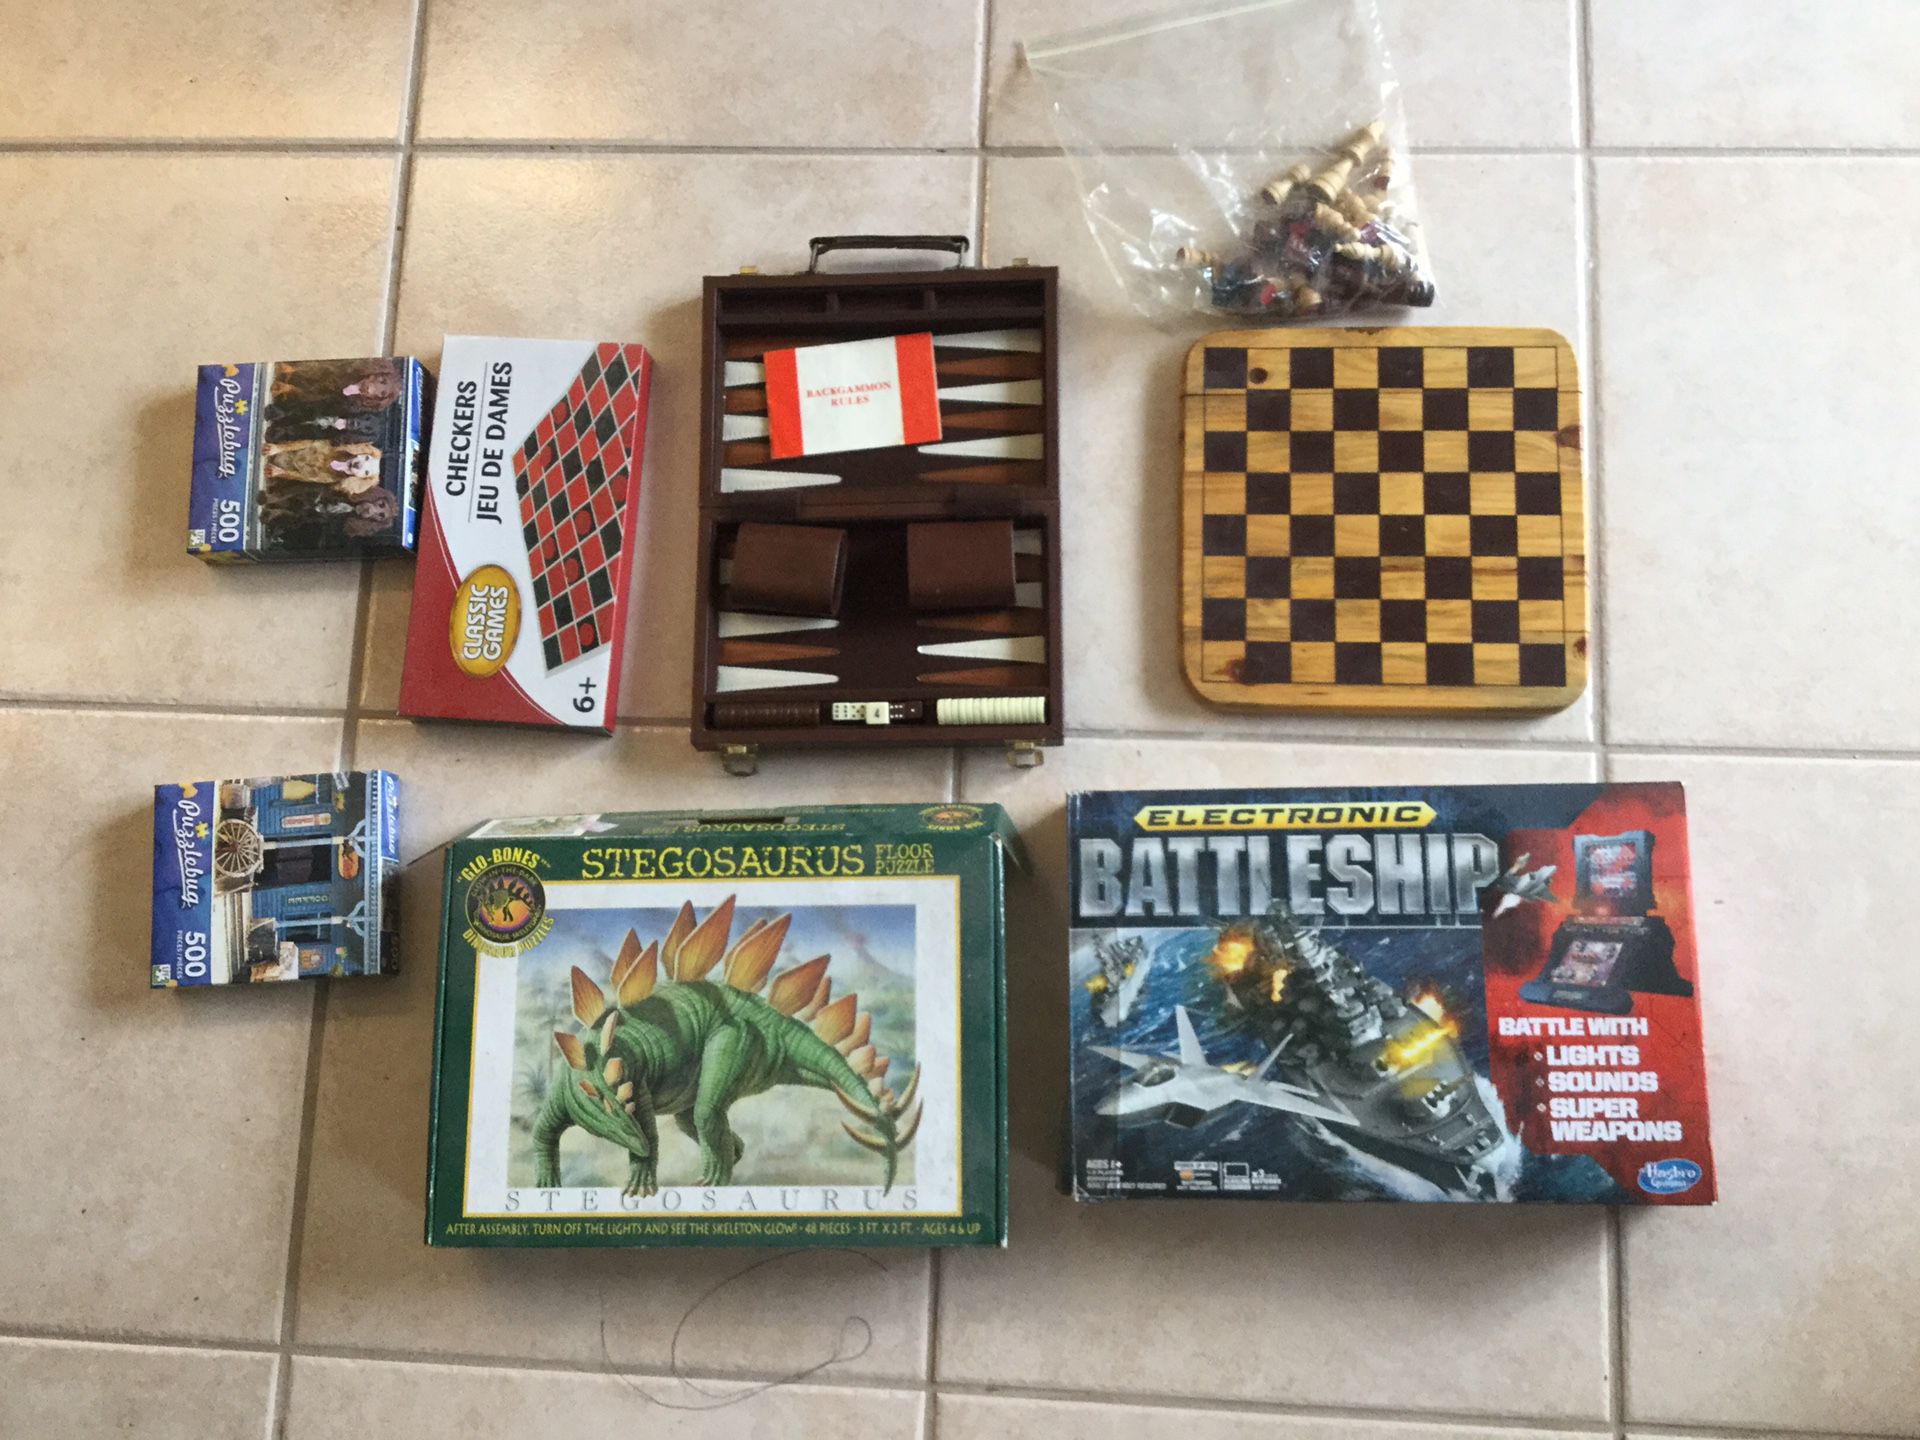 Assortment of games and puzzles for those rainy days